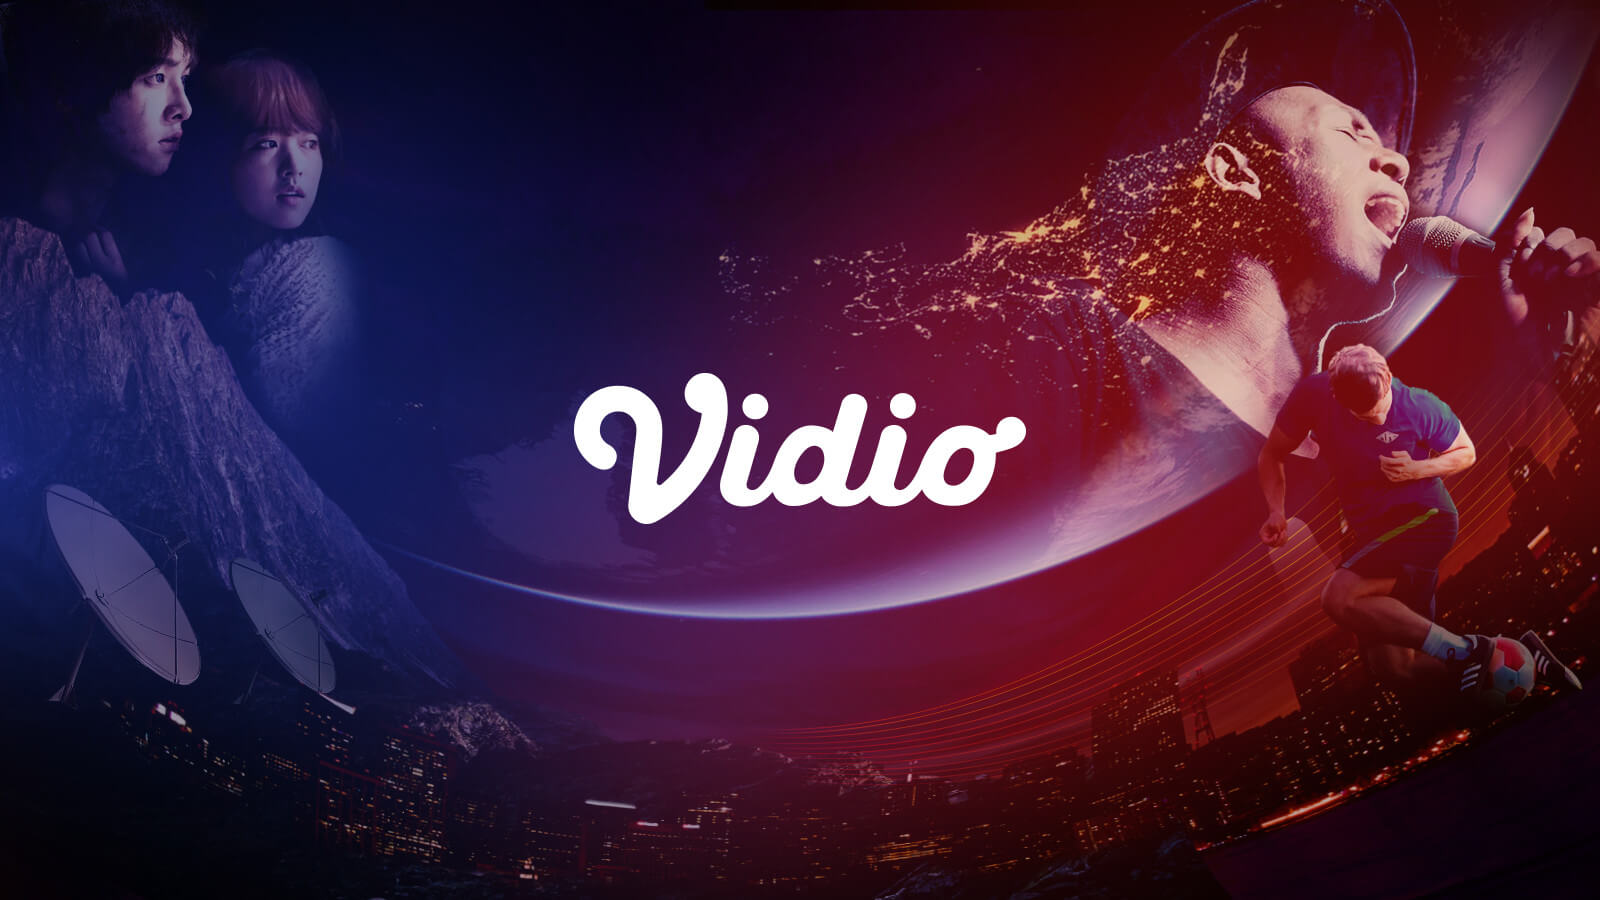 View Vidio.com - Video dan Tv Streaming di Indonesia outages and uptime